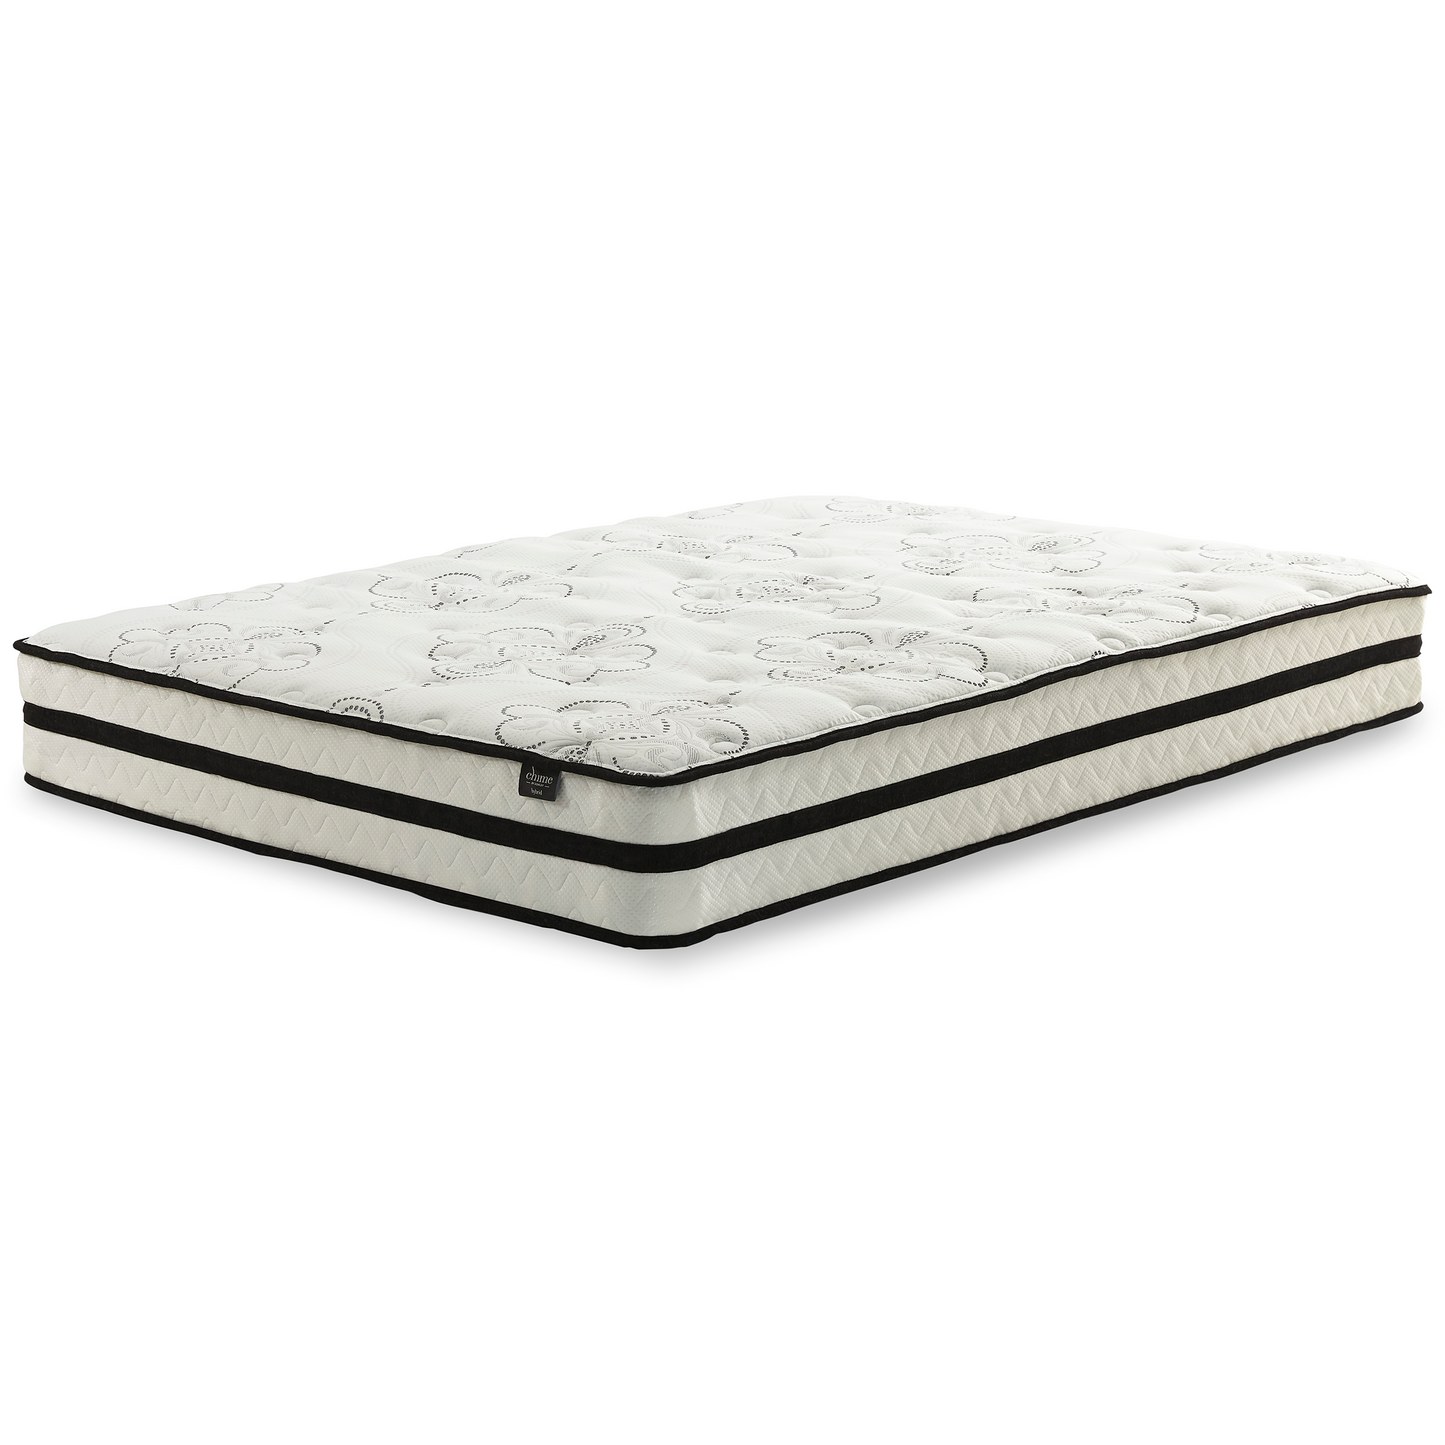 Roundhill Furniture Traditional Chime 10 Inch Hybrid Innerspring Mattress